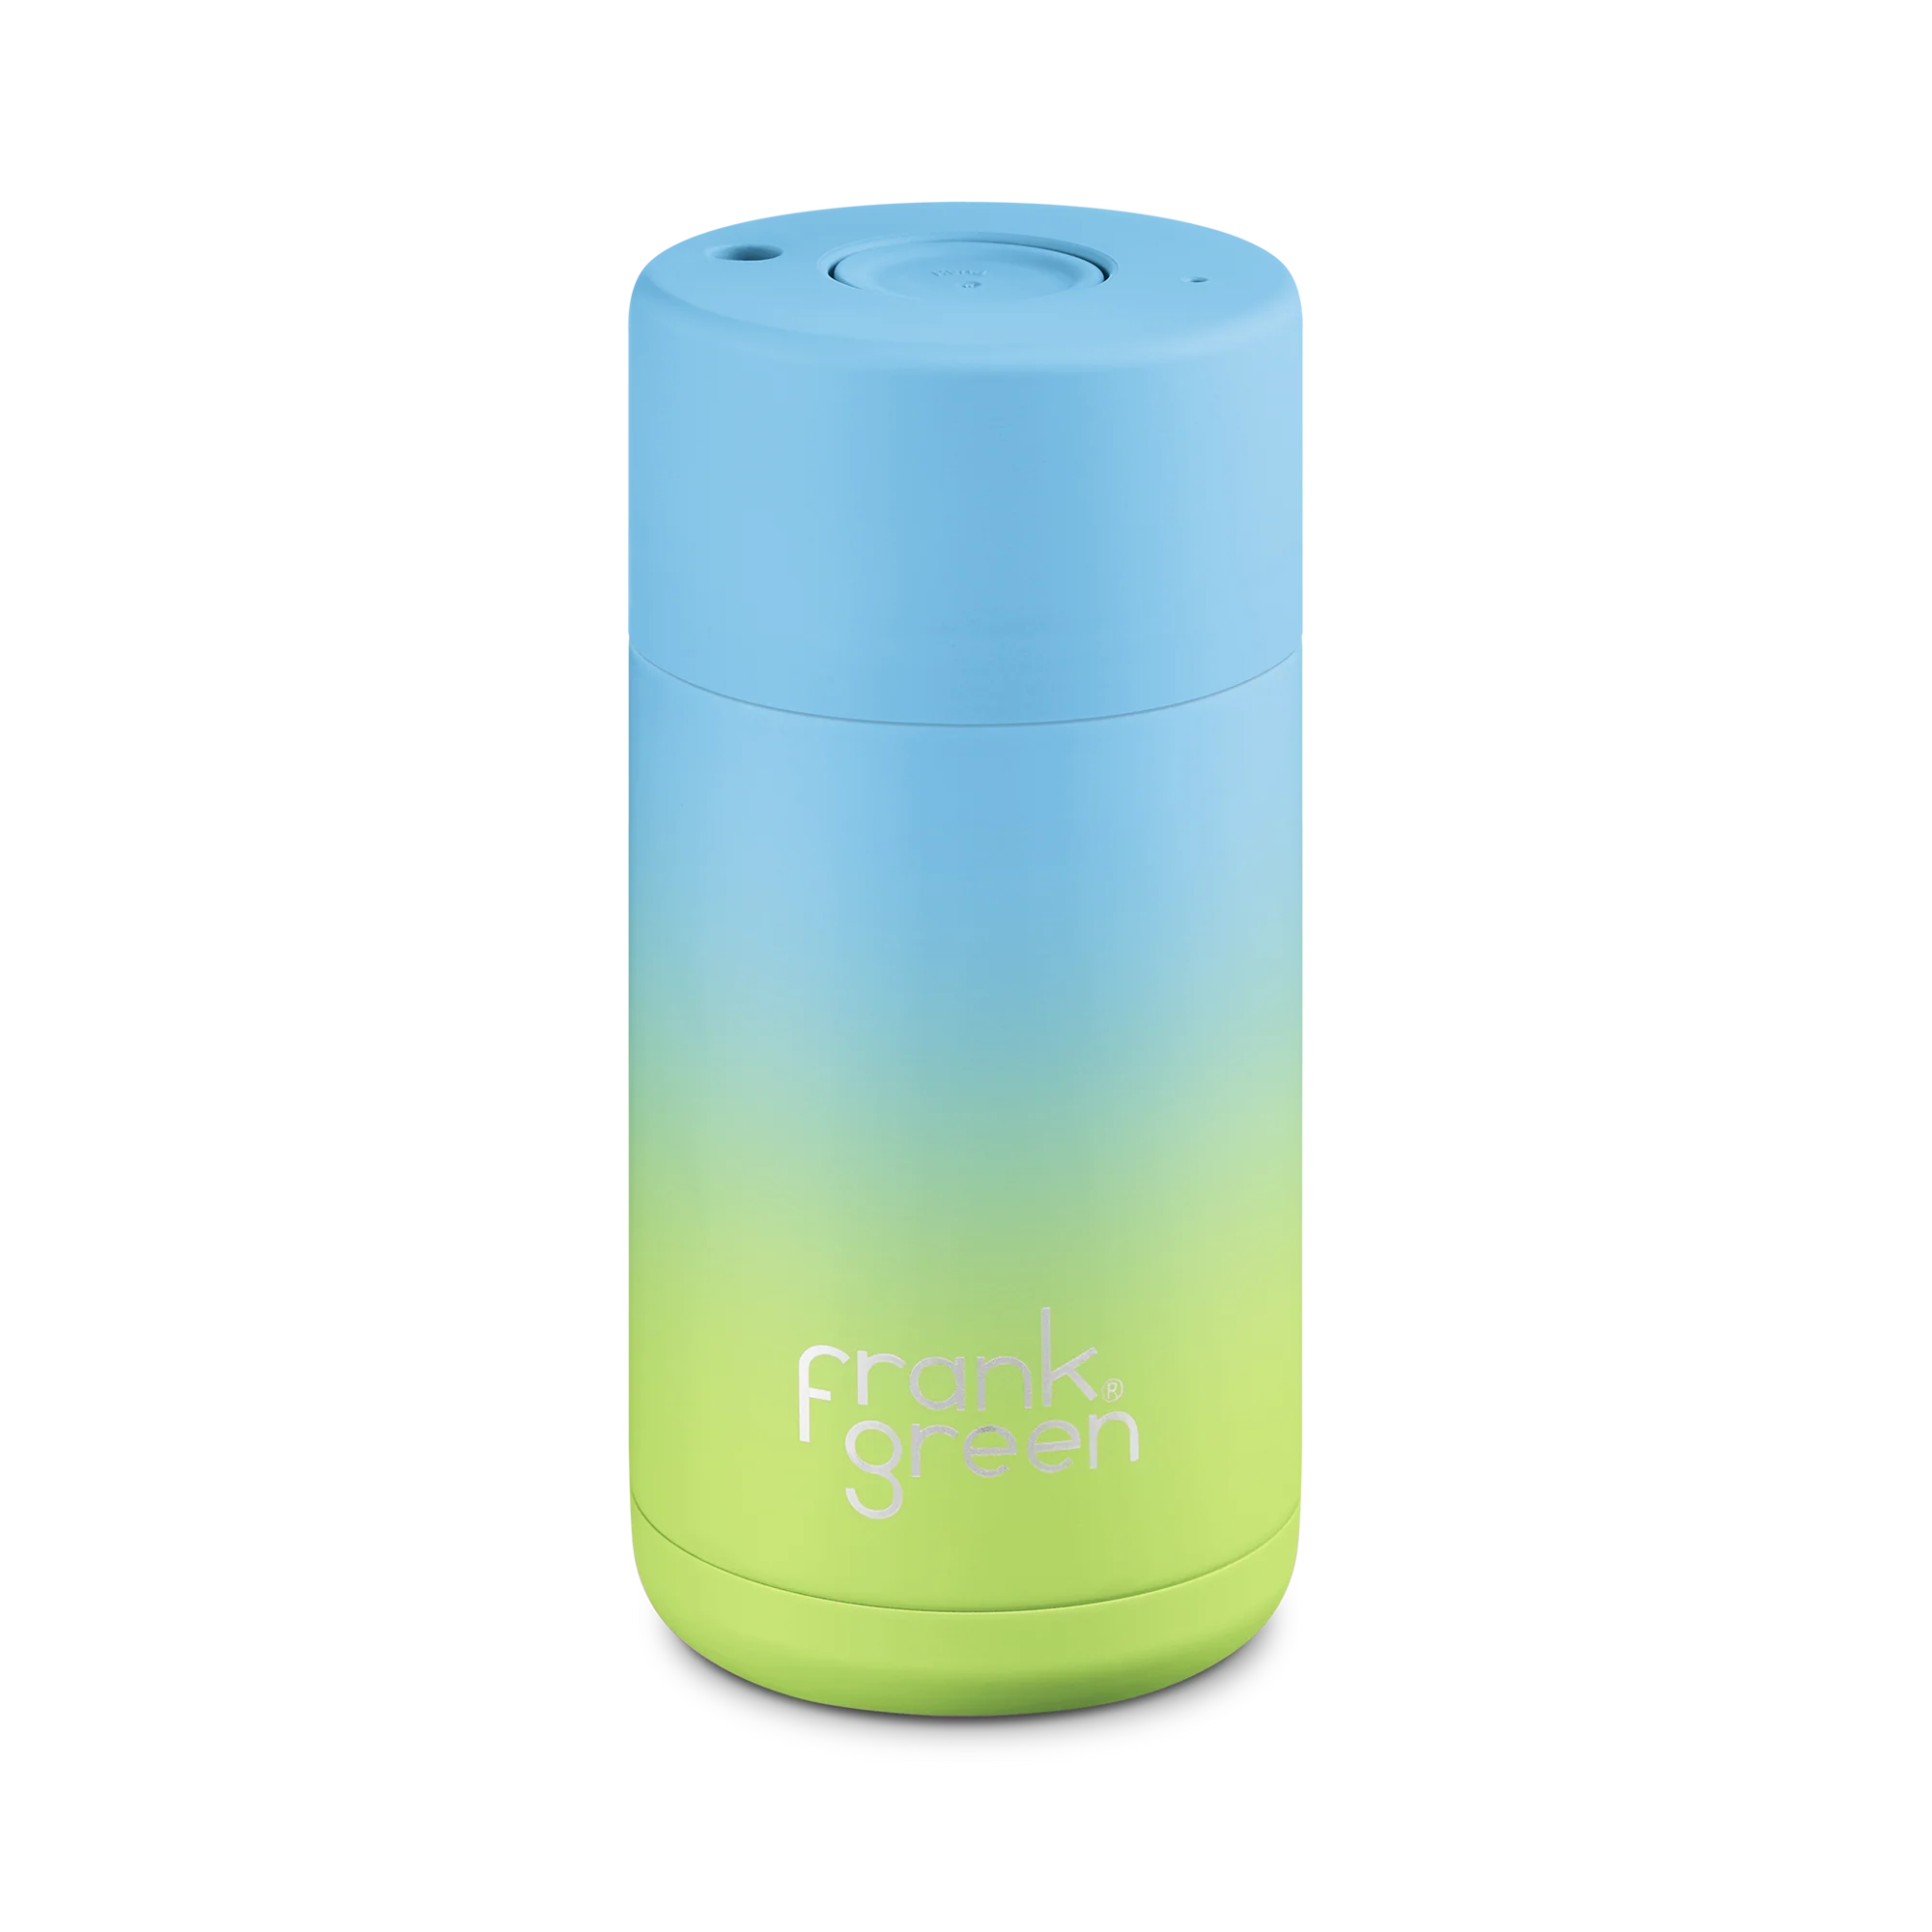 Limited Edition Gradient Ceramic Reusable Cup | 12oz 355ml